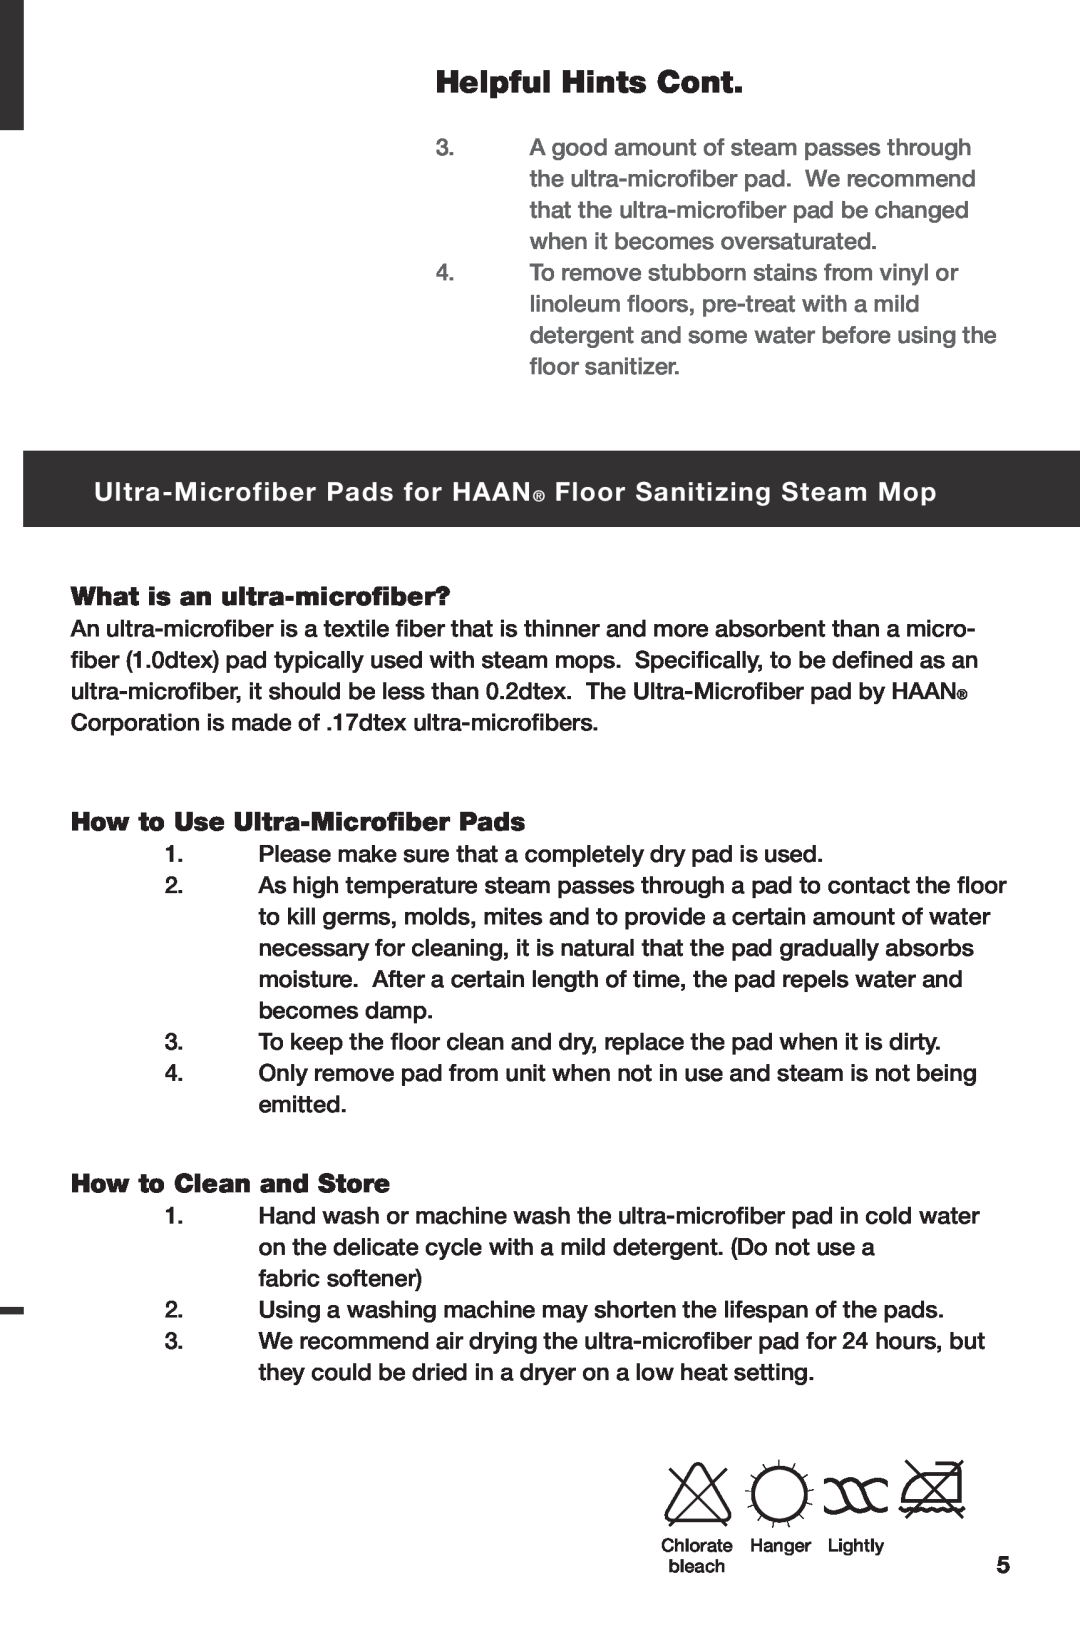 Haan HD-60 Helpful Hints Cont, What is an ultra-microfiber?, How to Use Ultra-MicrofiberPads, How to Clean and Store 